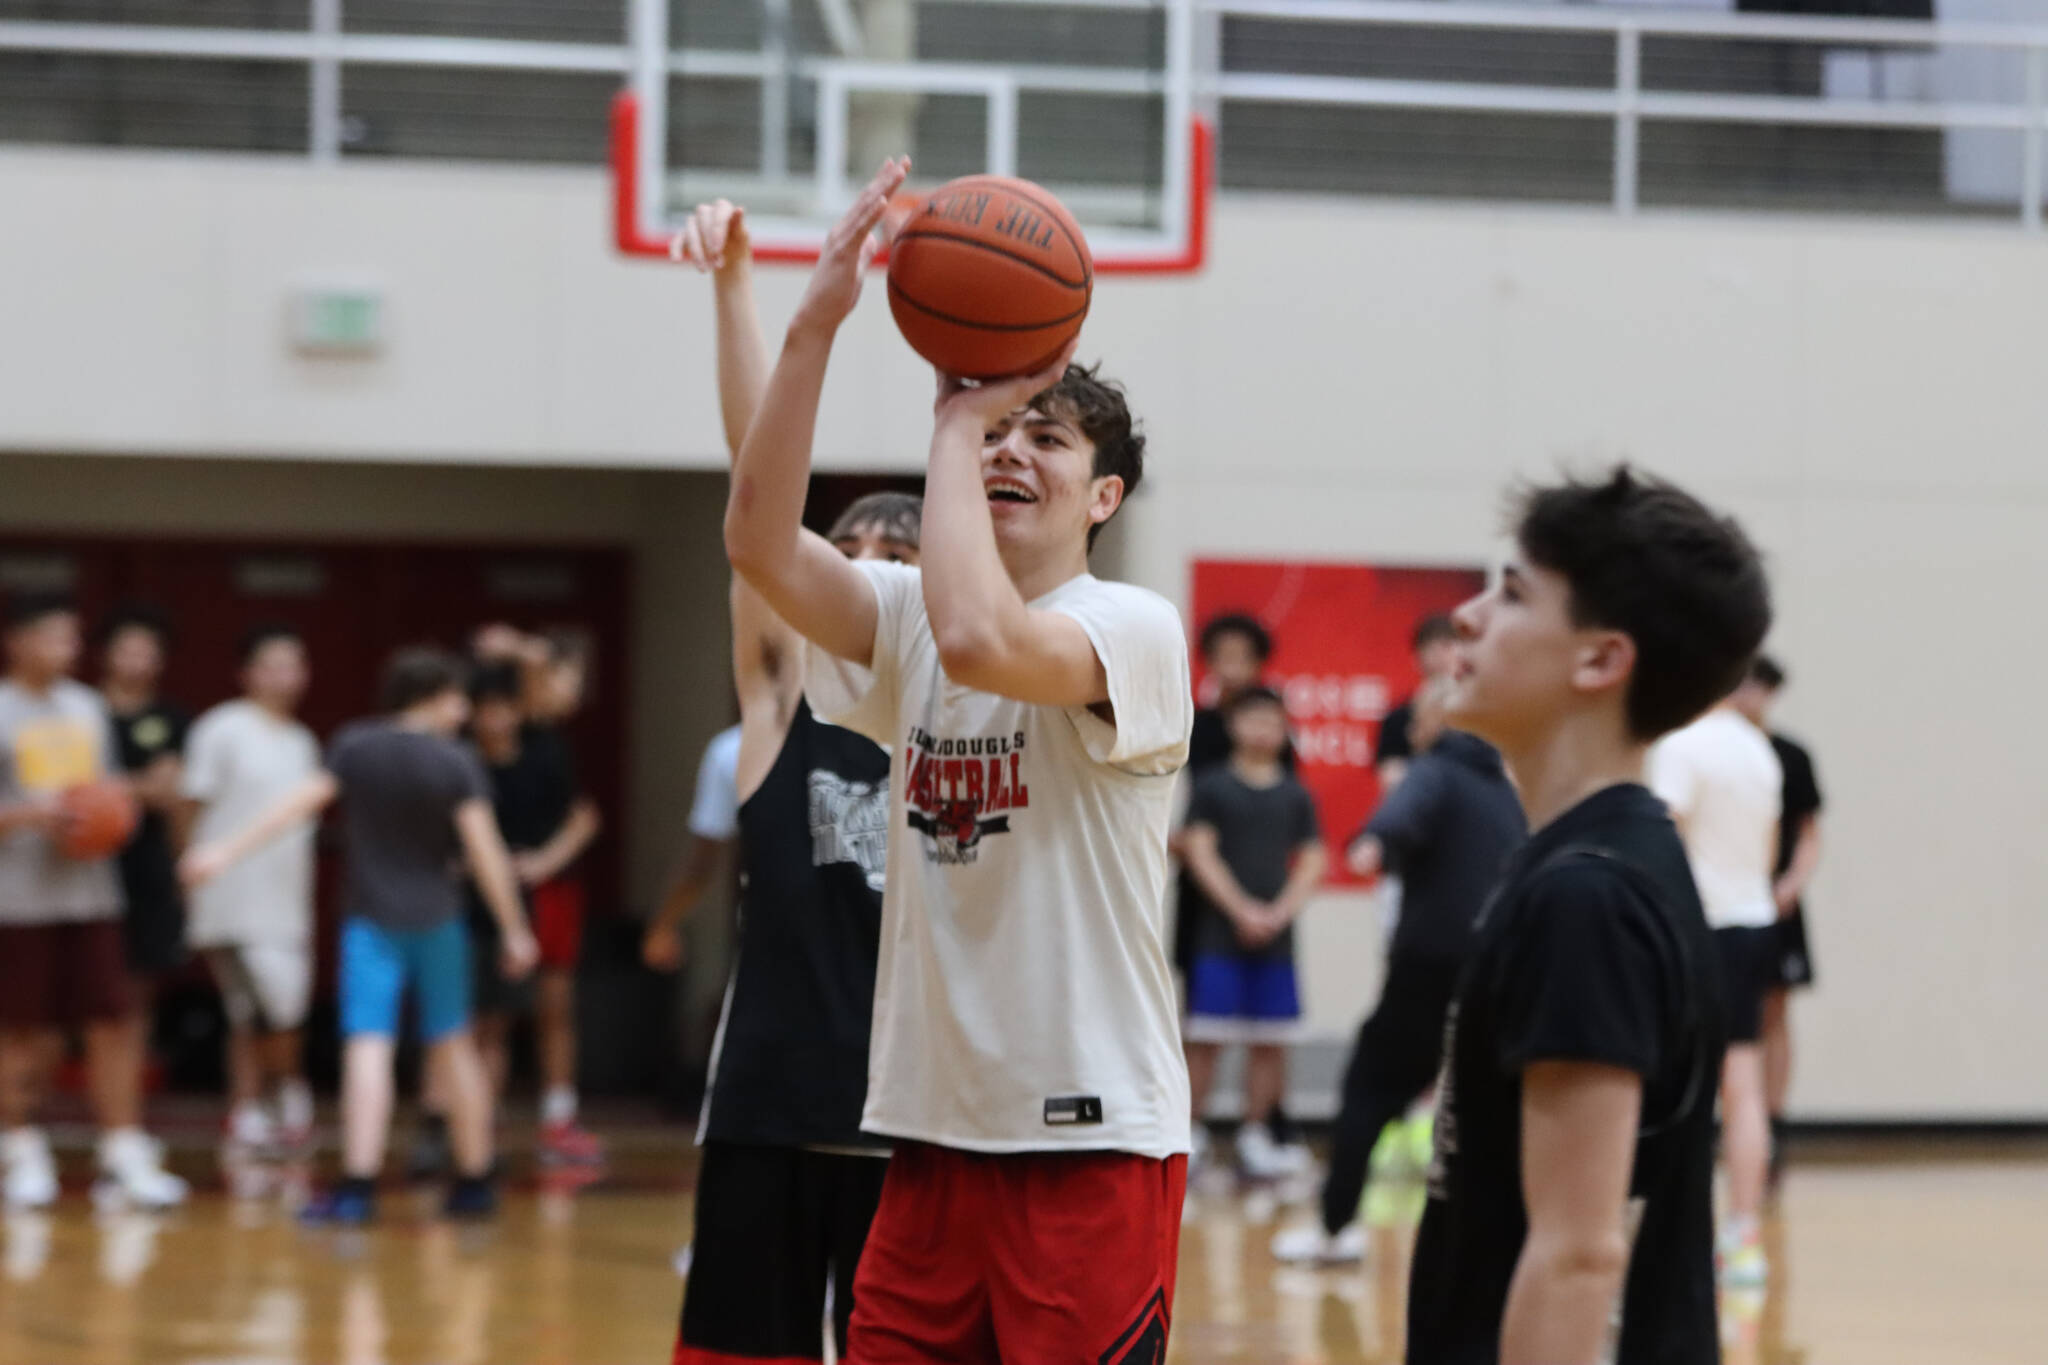 From Left to right, JDHS players seniors Joey Aline, Orion Dybdahl and freshman Brandon Casperson work on free throws during a Wednesday night practice. (Jonson Kuhn / Juneau Empire)